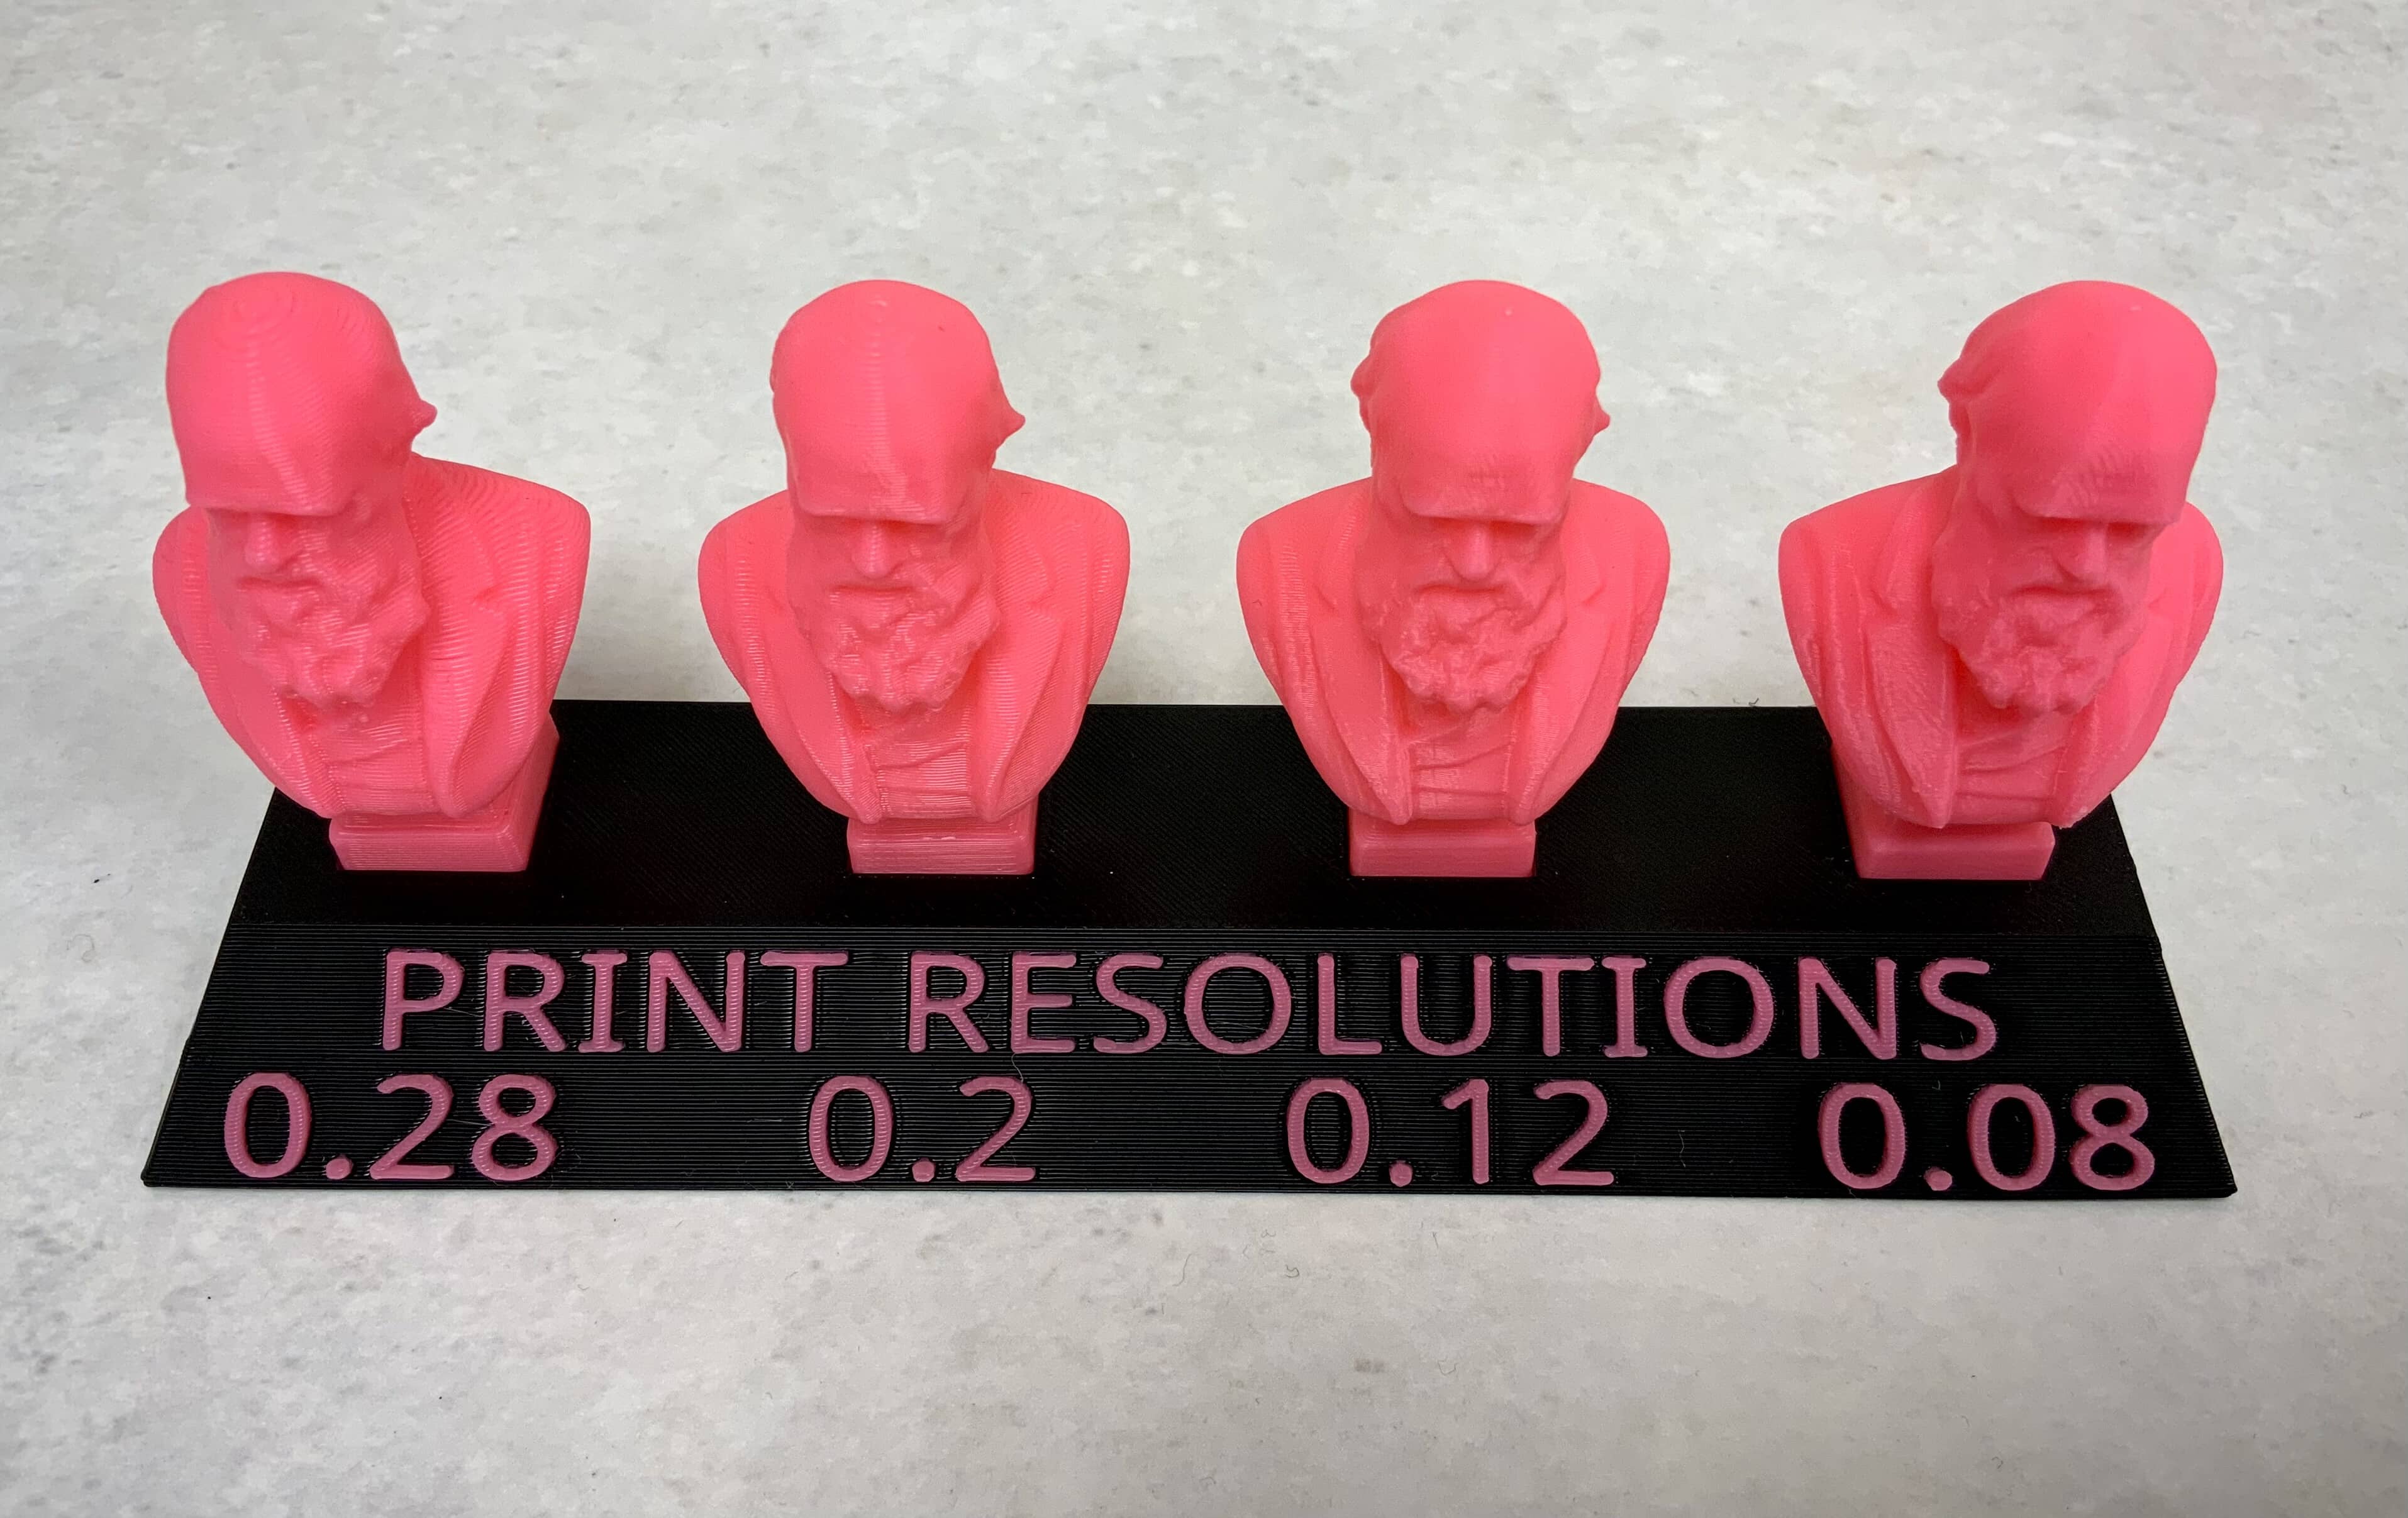 Four pink 3D printed busts of Charles Darwin side by side on a black plinth with pink text which reads "Print Resolutions" and the numbers 0.28, 0.2, 0.12, and 0.08 under each bust. The left bust has visible stair-stepped layers, with each subsequent bust showing subtler layers until the right bust which has barely visible layer lines.